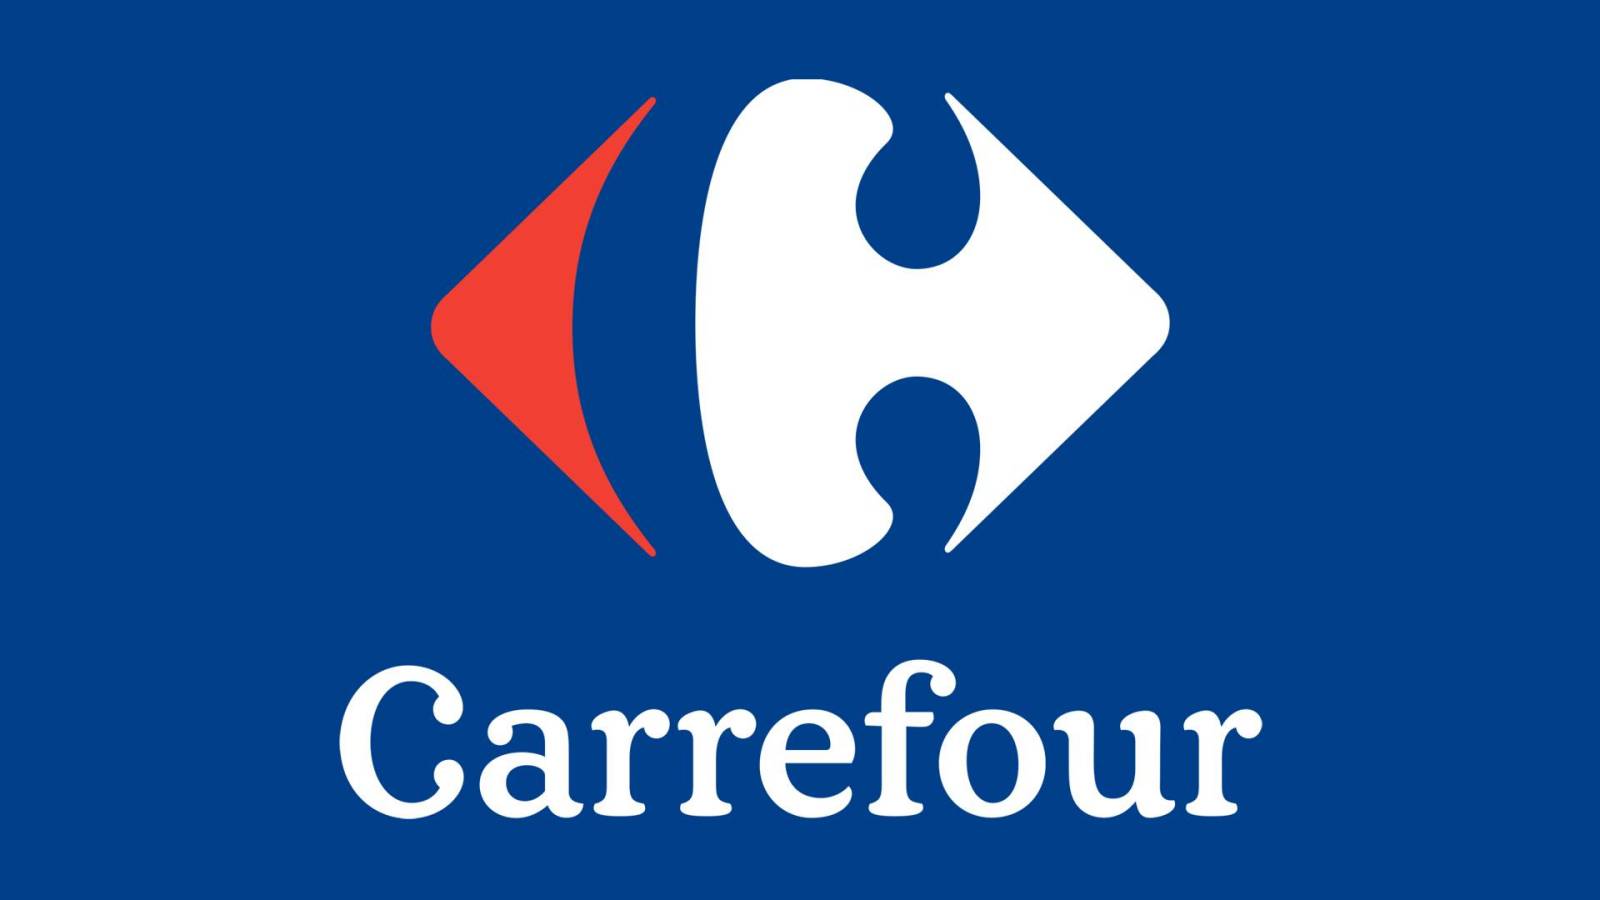 Carrefour Information Warning Issued Millions of Romanians